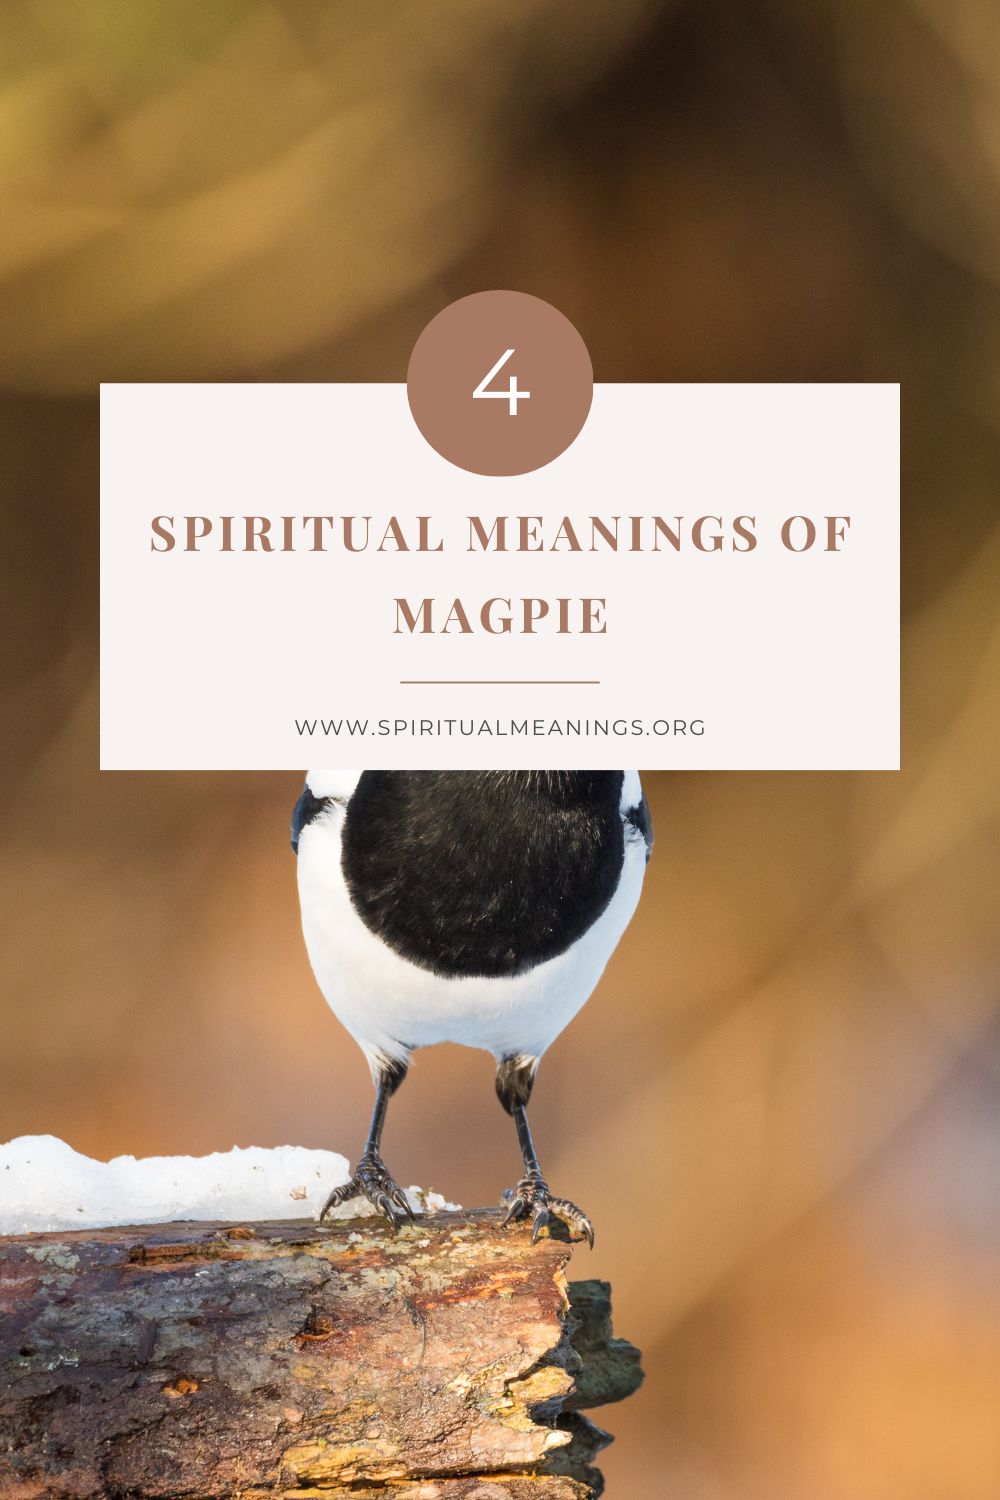 Magpie as a Power Animal